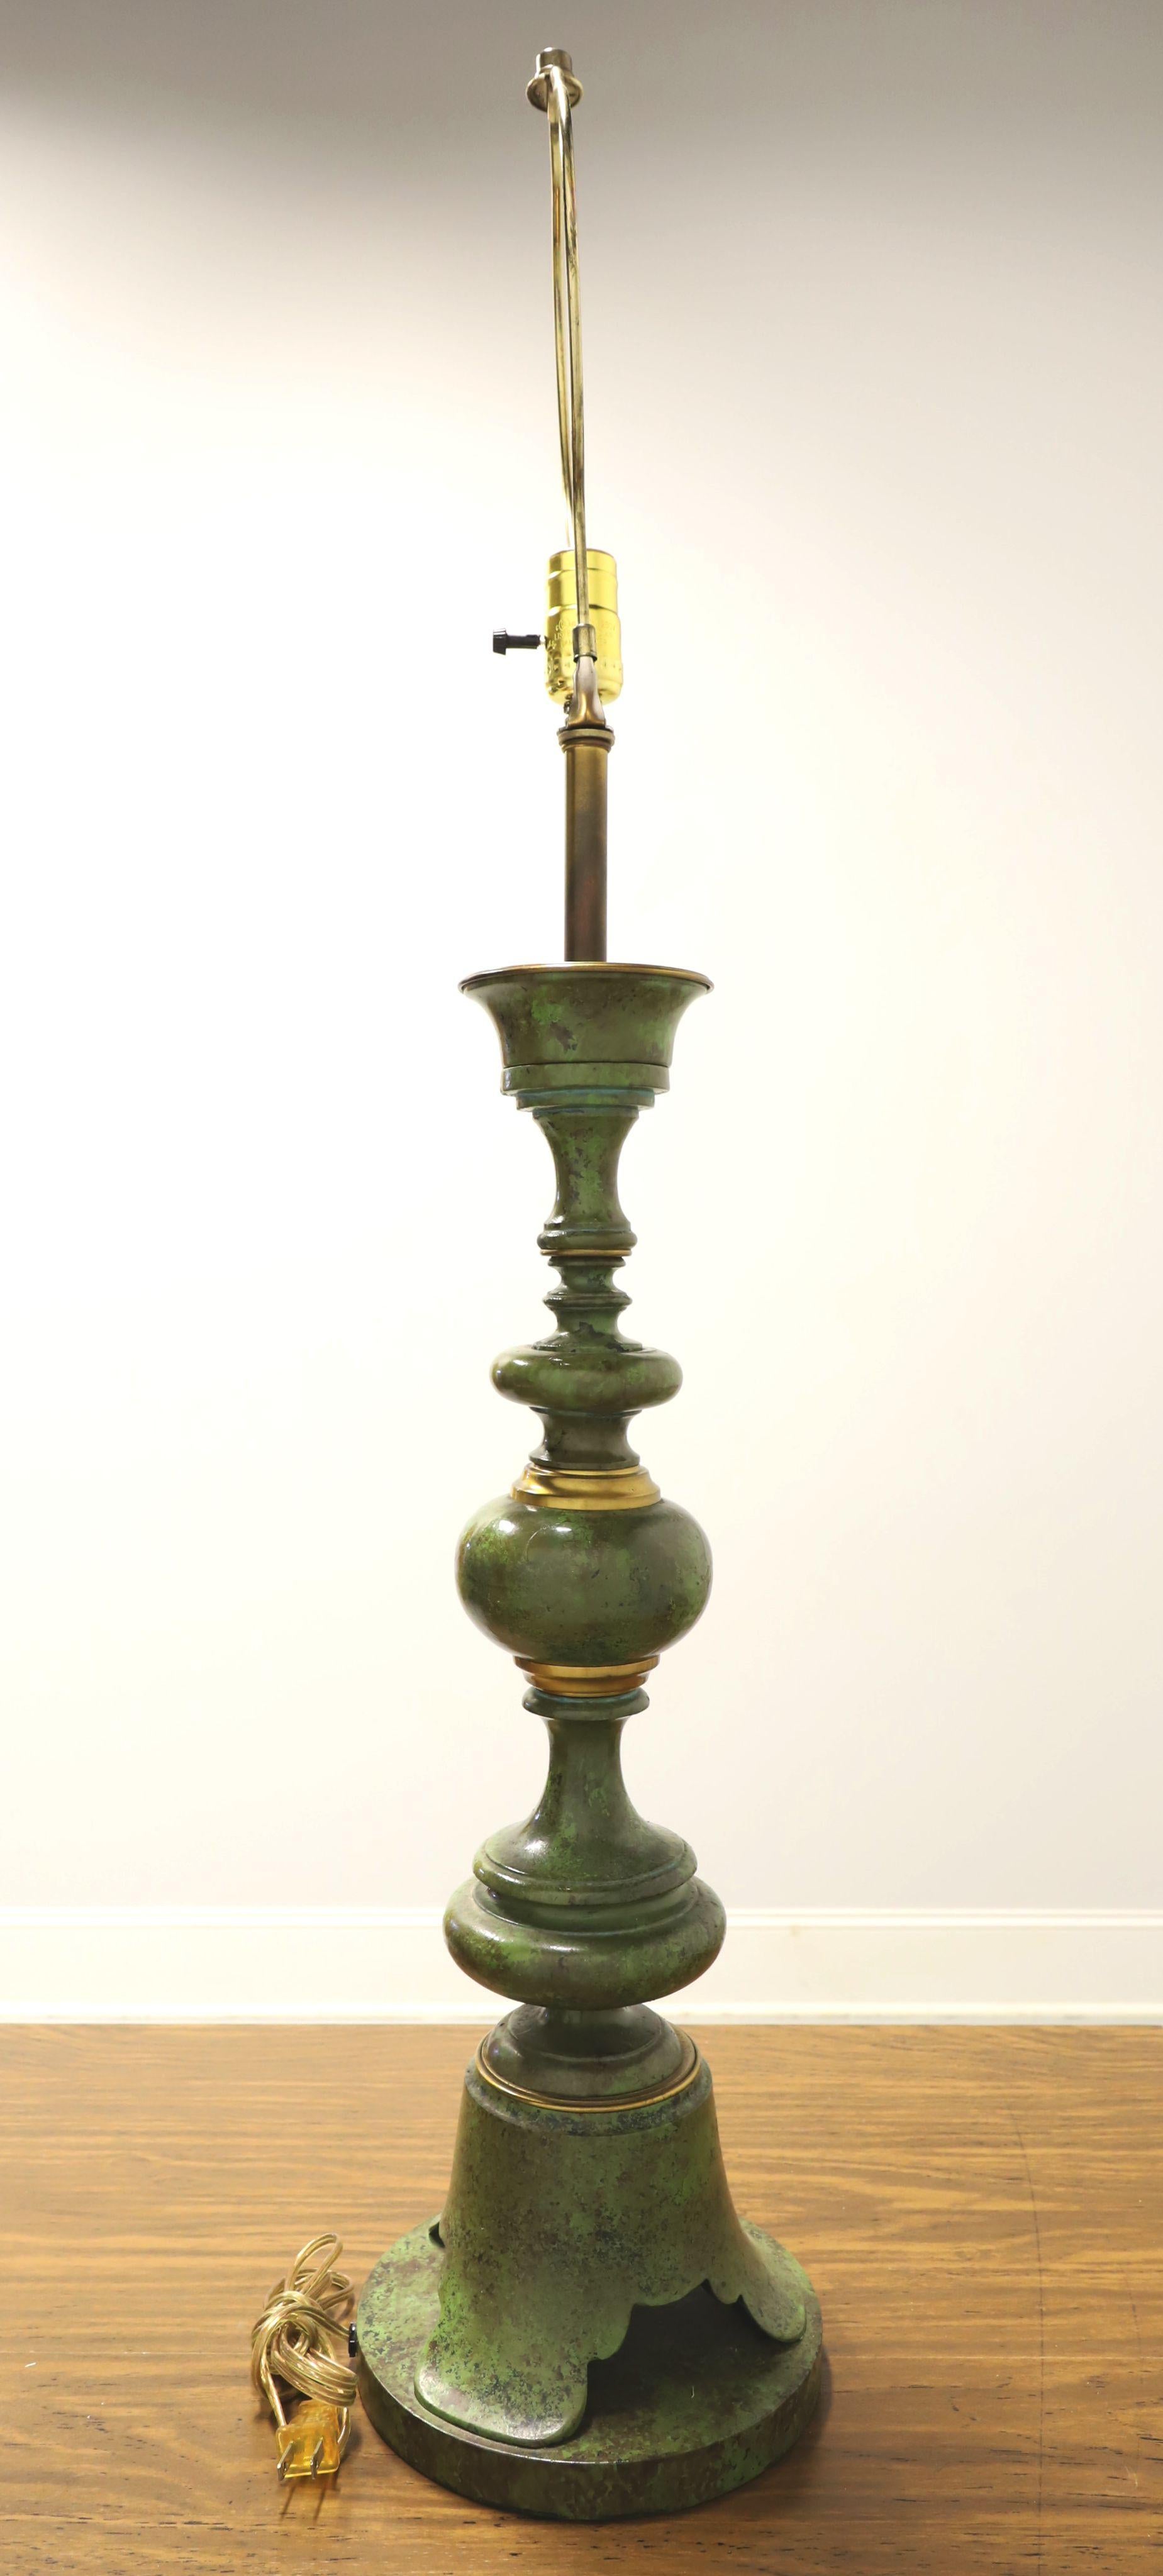 An extra large Hollywood Regency style table lamp, unbranded. Solid metal painted in a green and black marbleized design with gold ring accents and bell like base. Single standard bulb socket with on/off rotary switch, removable brass harp and brass